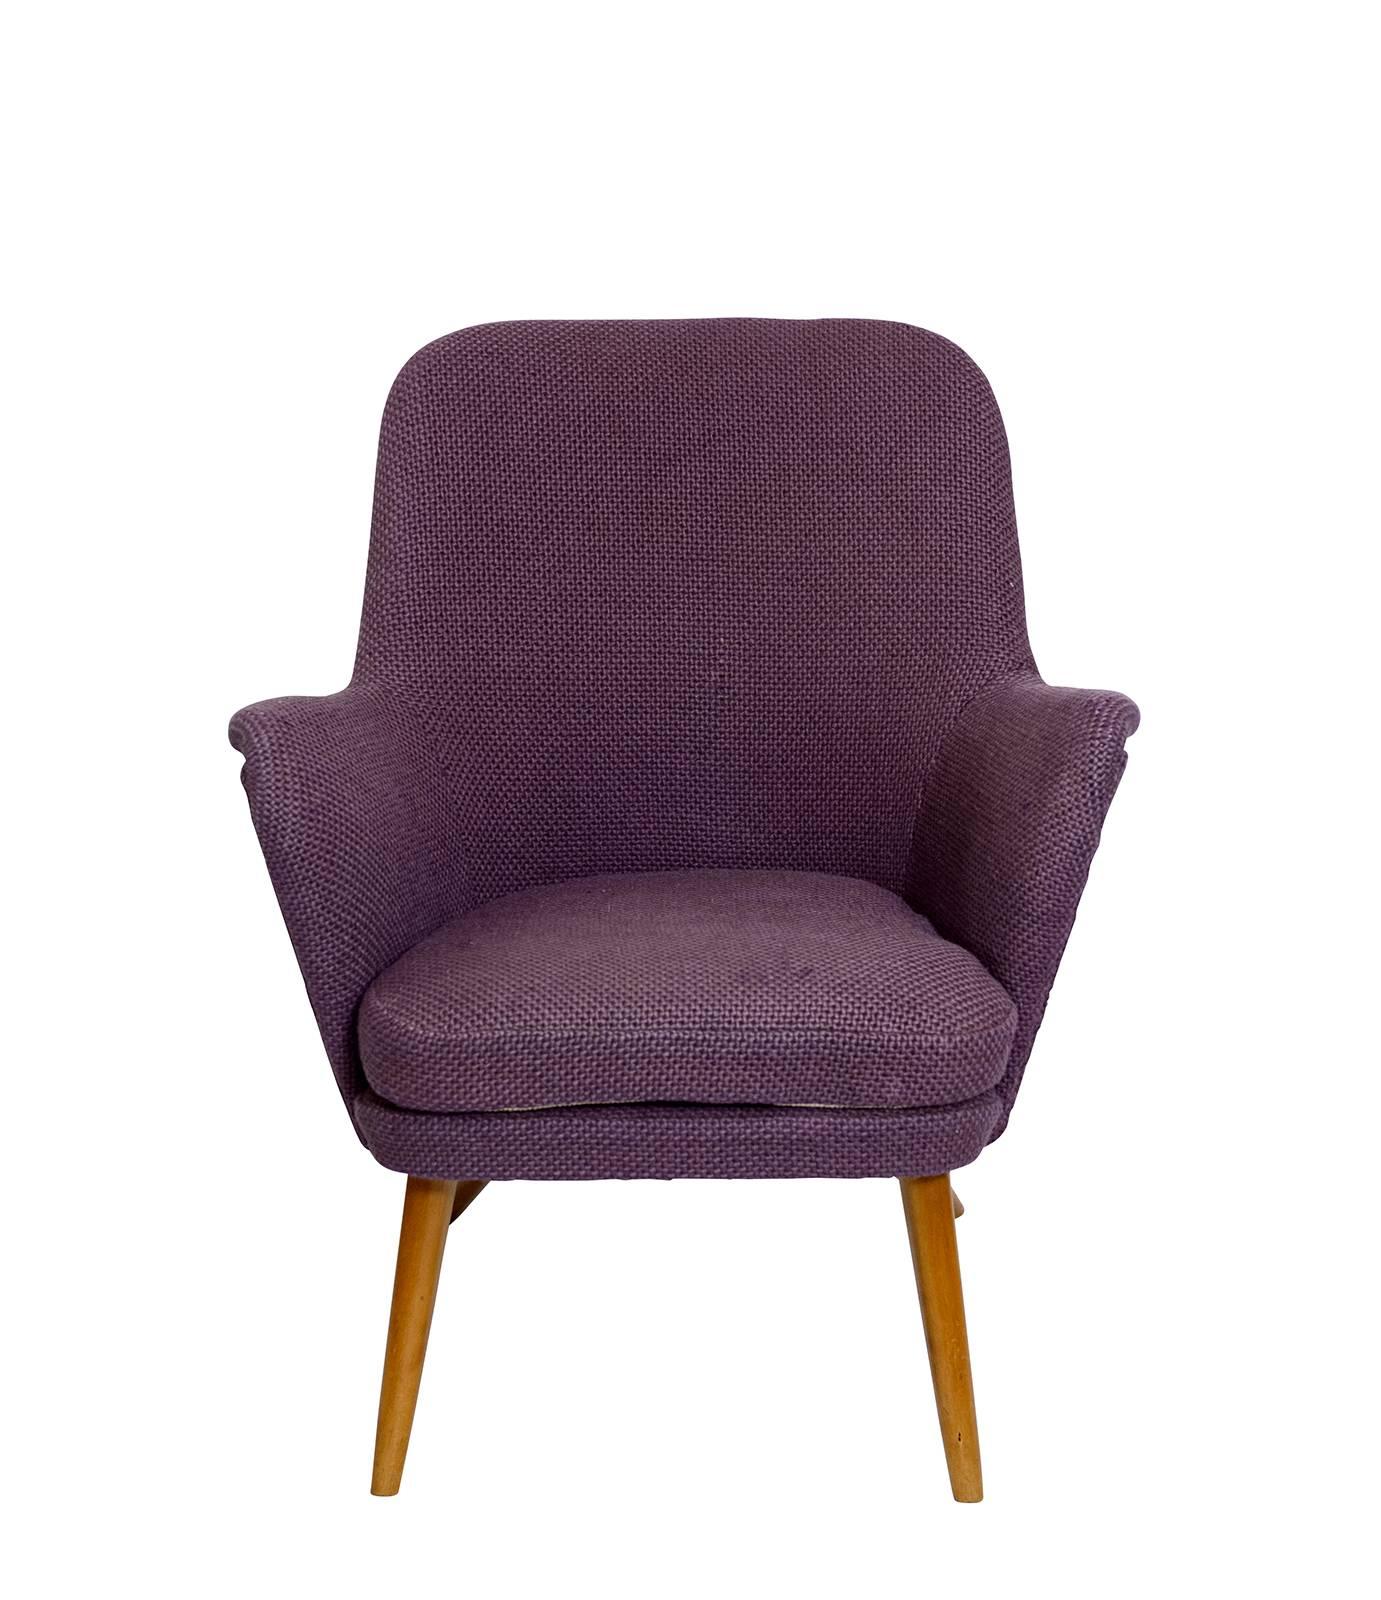 Carl Gustav Hiort af Ornäs lounge chair.   Store formerly known as ARTFUL DODGER INC